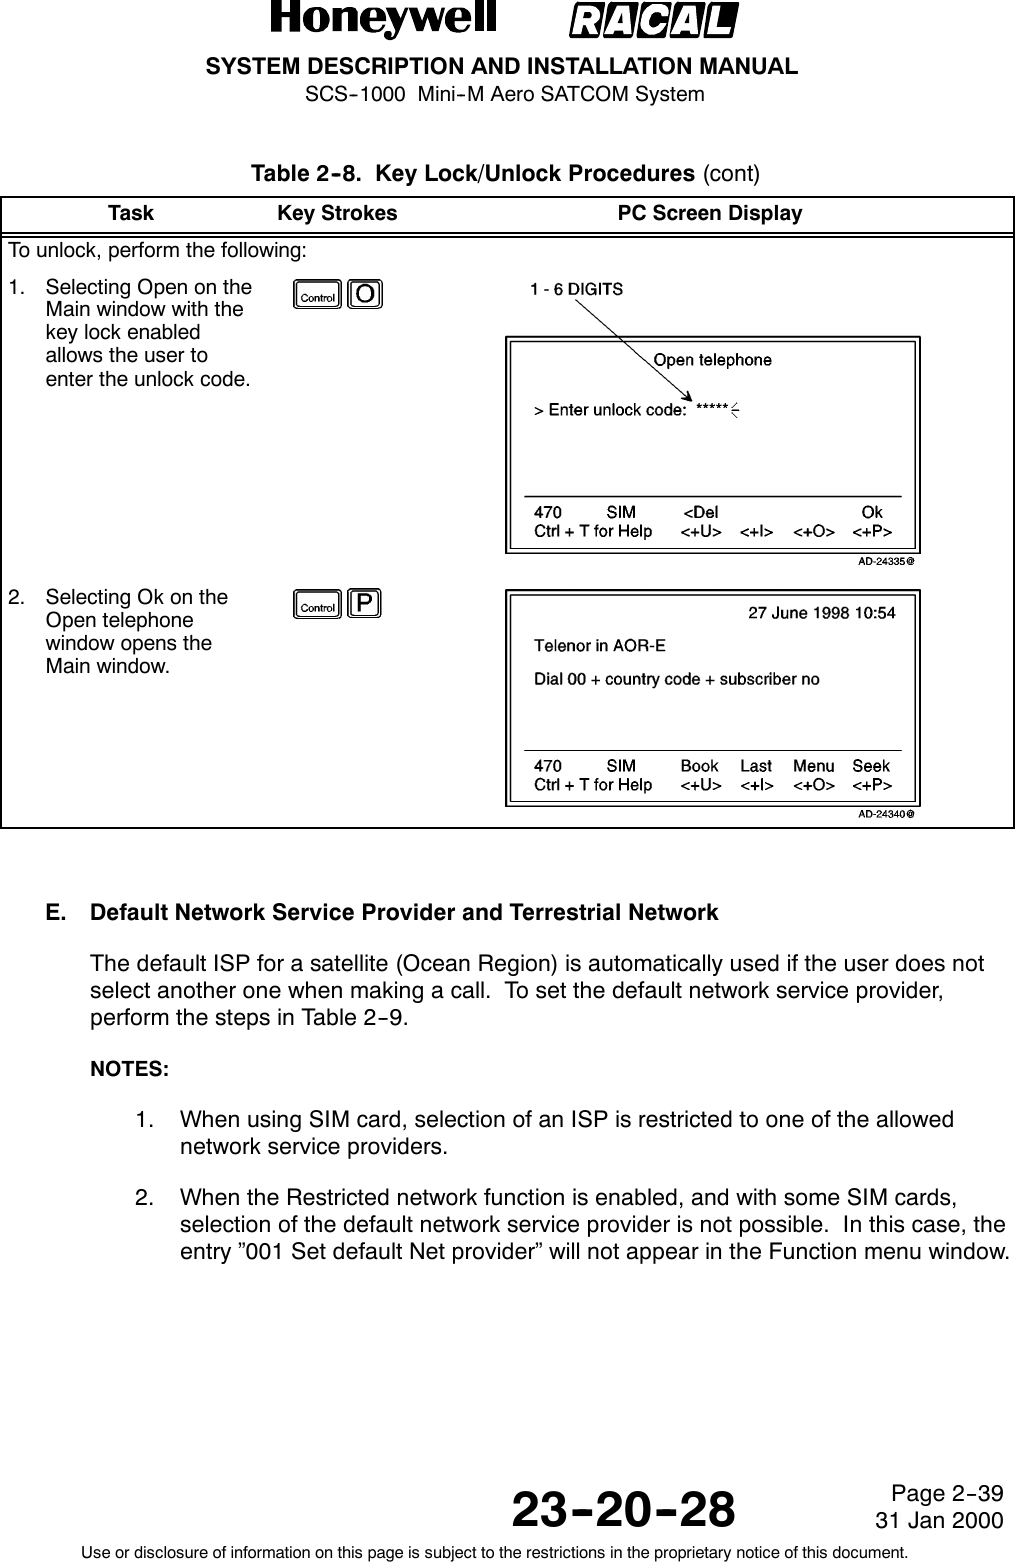 SYSTEM DESCRIPTION AND INSTALLATION MANUALSCS--1000 Mini--M Aero SATCOM System23--20--28Use or disclosure of information on this page is subject to the restrictions in the proprietary notice of this document.Page 2--3931 Jan 2000Table 2--8. Key Lock/Unlock Procedures (cont)Task PC Screen DisplayKey StrokesTo unlock, perform the following:1. Selecting Open on theMain window with thekey lock enabledallows the user toenter the unlock code.2. Selecting Ok on theOpen telephonewindow opens theMain window.E. Default Network Service Provider and Terrestrial NetworkThe default ISP for a satellite (Ocean Region) is automatically used if the user does notselect another one when making a call. To set the default network service provider,perform the steps in Table 2--9.NOTES:1. When using SIM card, selection of an ISP is restricted to one of the allowednetwork service providers.2. When the Restricted network function is enabled, and with some SIM cards,selection of the default network service provider is not possible. In this case, theentry ”001 Set default Net provider” will not appear in the Function menu window.